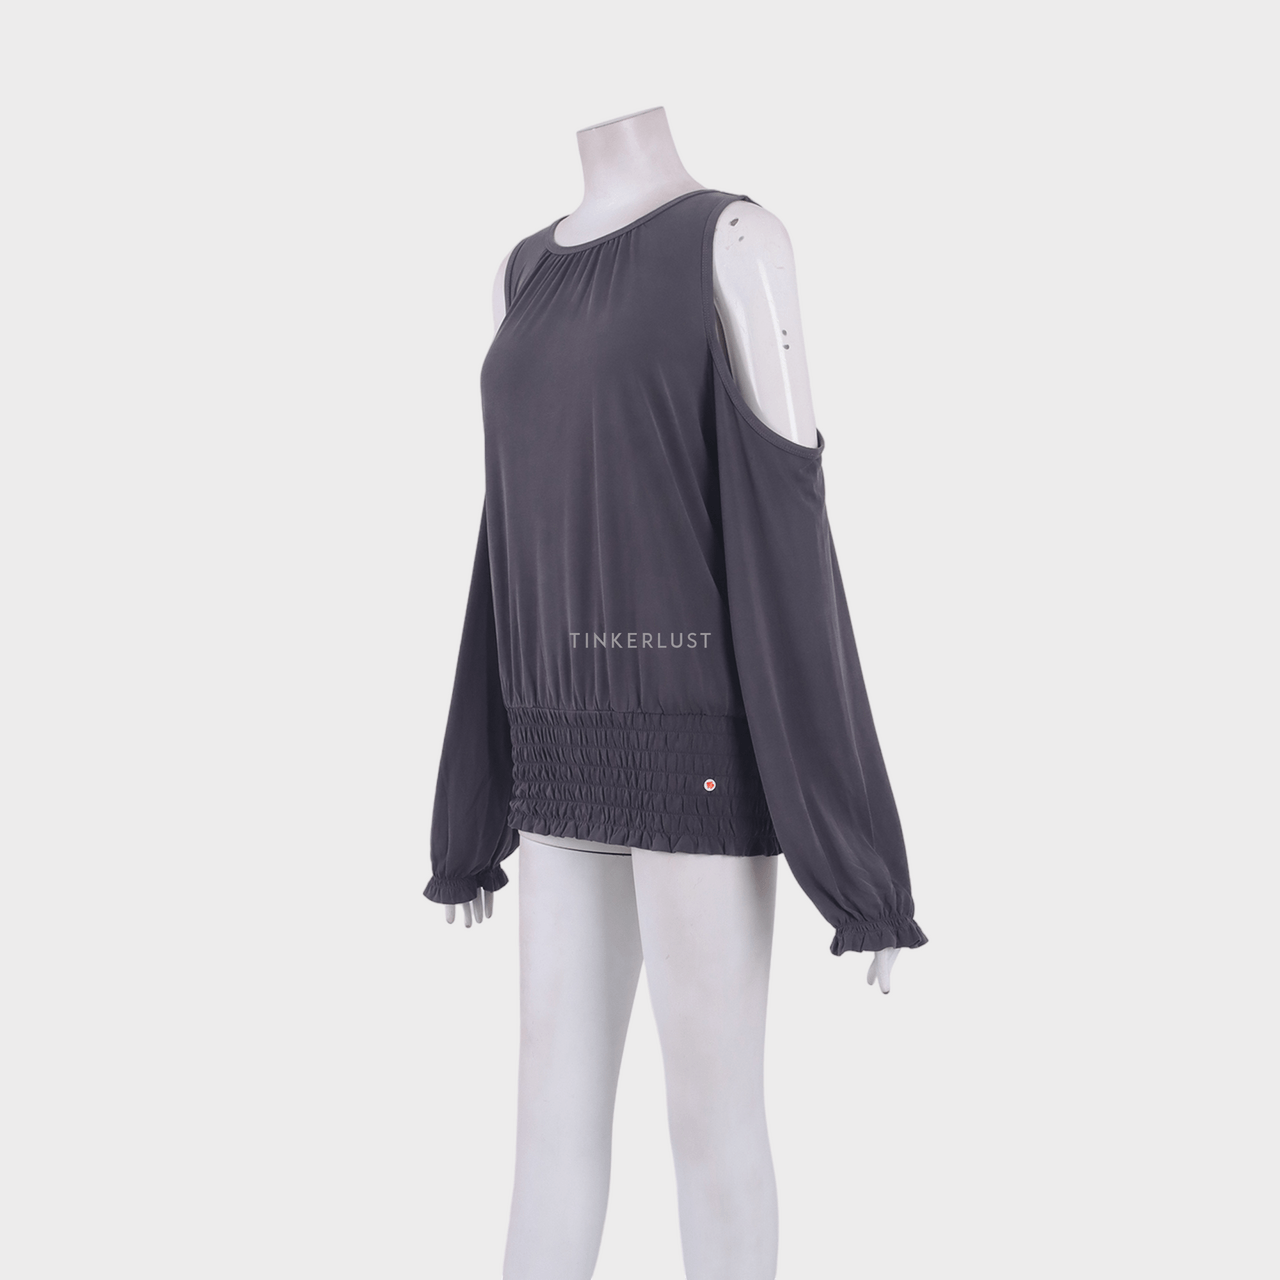 Abercrombie & Fitch Grey Blouse